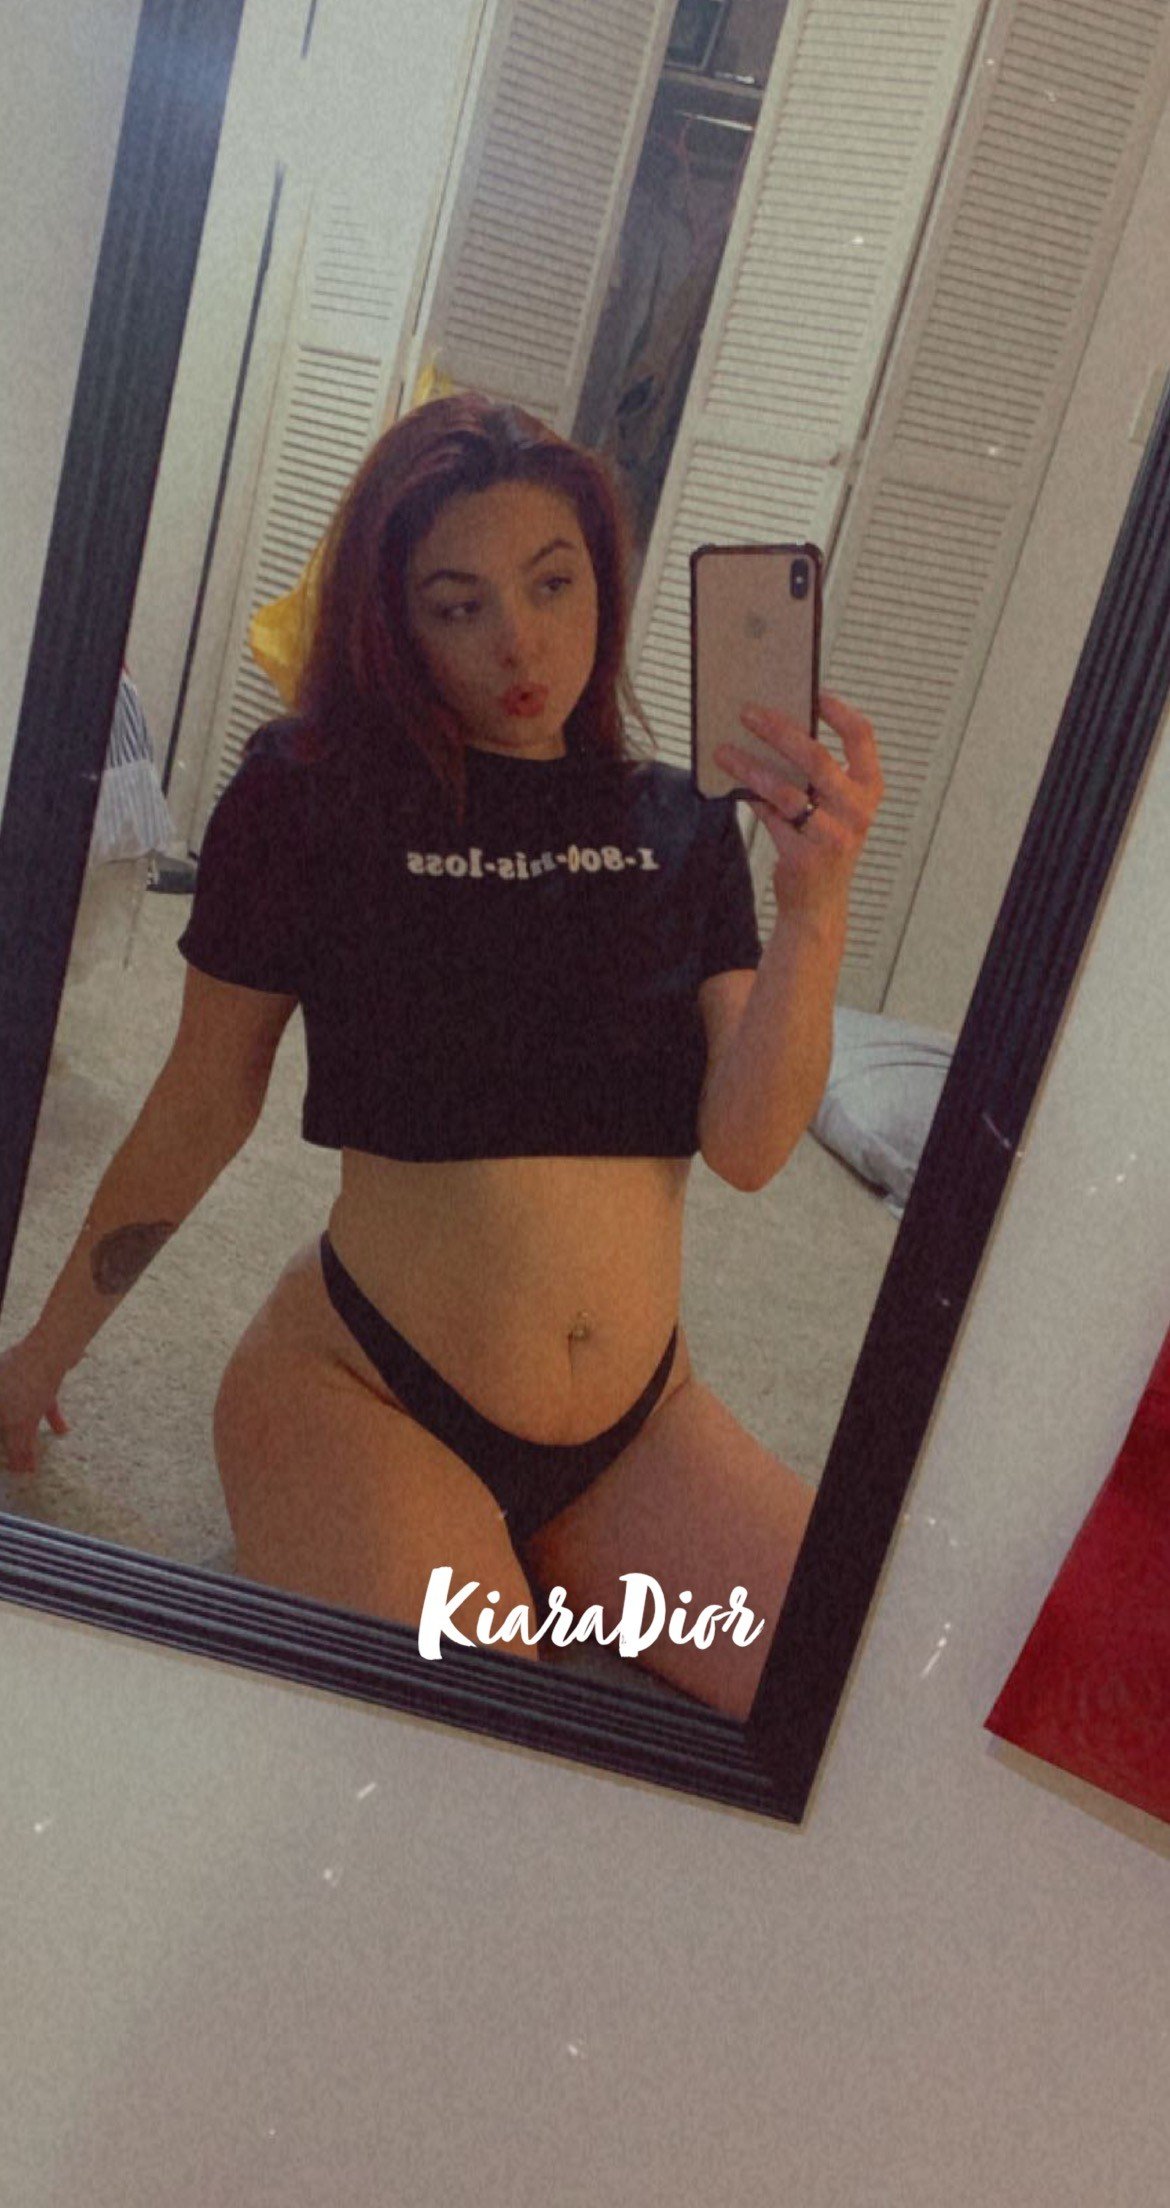 Photo by KiaraDior with the username @KiaraDior, who is a verified user,  November 10, 2020 at 12:11 PM and the text says 'KiaraDior 💋

https://kiaradior.ismygirl.com/

#milf #amateur #hotwife #sharemywife #sellingnudes #sexy #sluts #fancentro #growwithme #realcontent #like #share #follow'